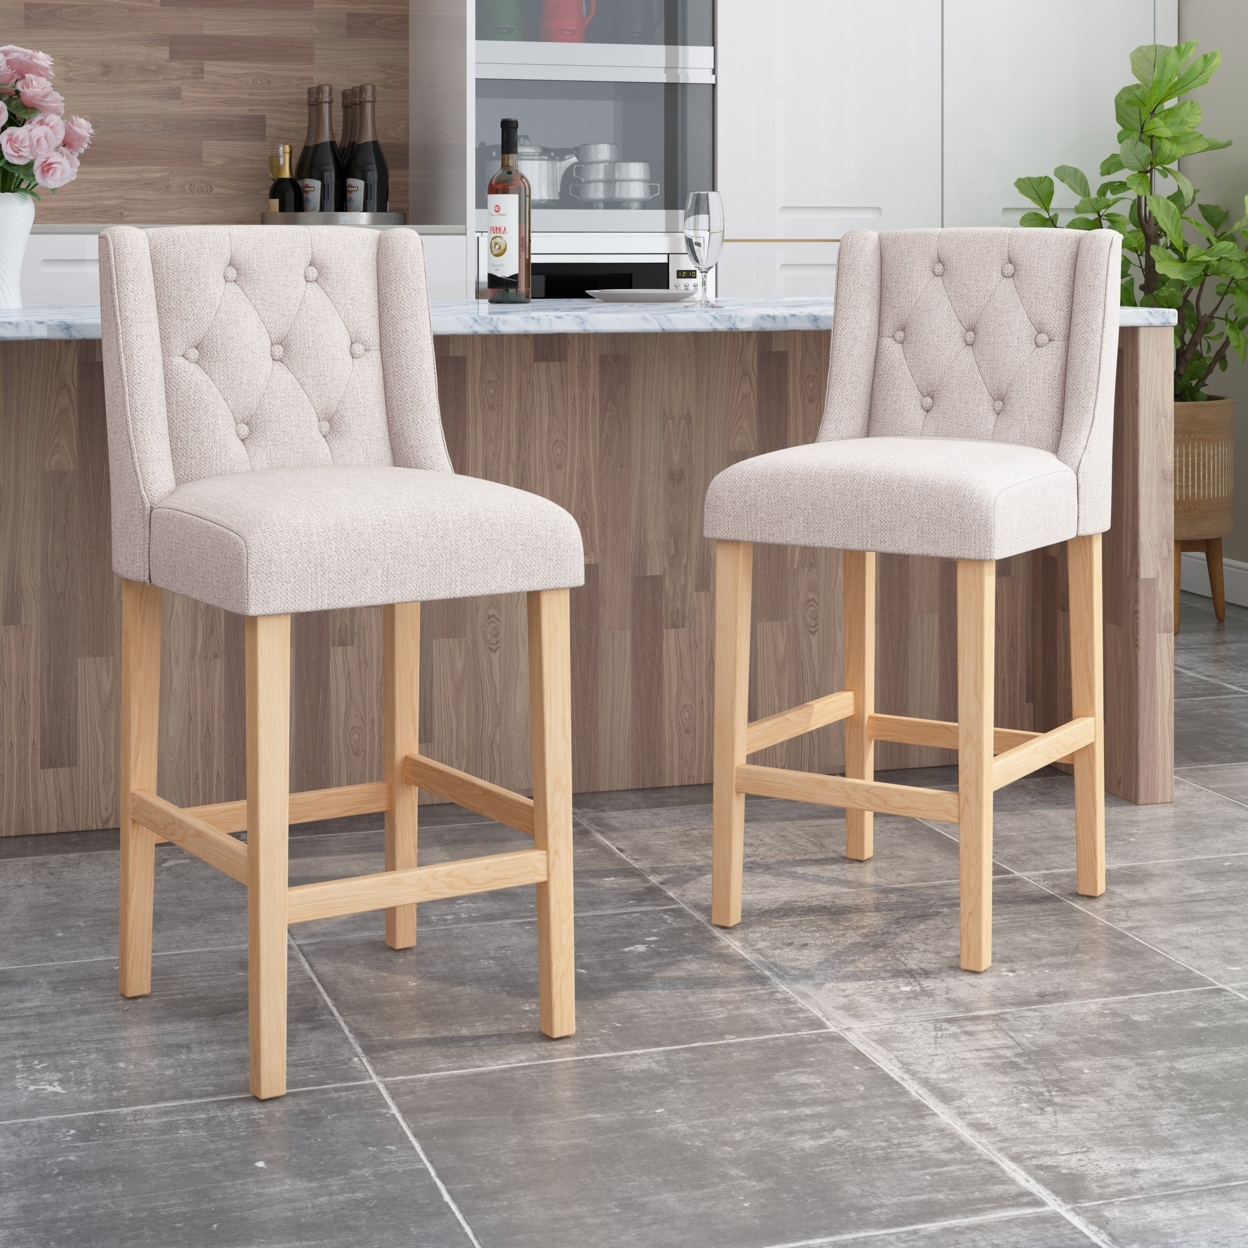 Zaydrian Button Tufted Fabric Wingback Bar Stool (Set Of 2) - Beige